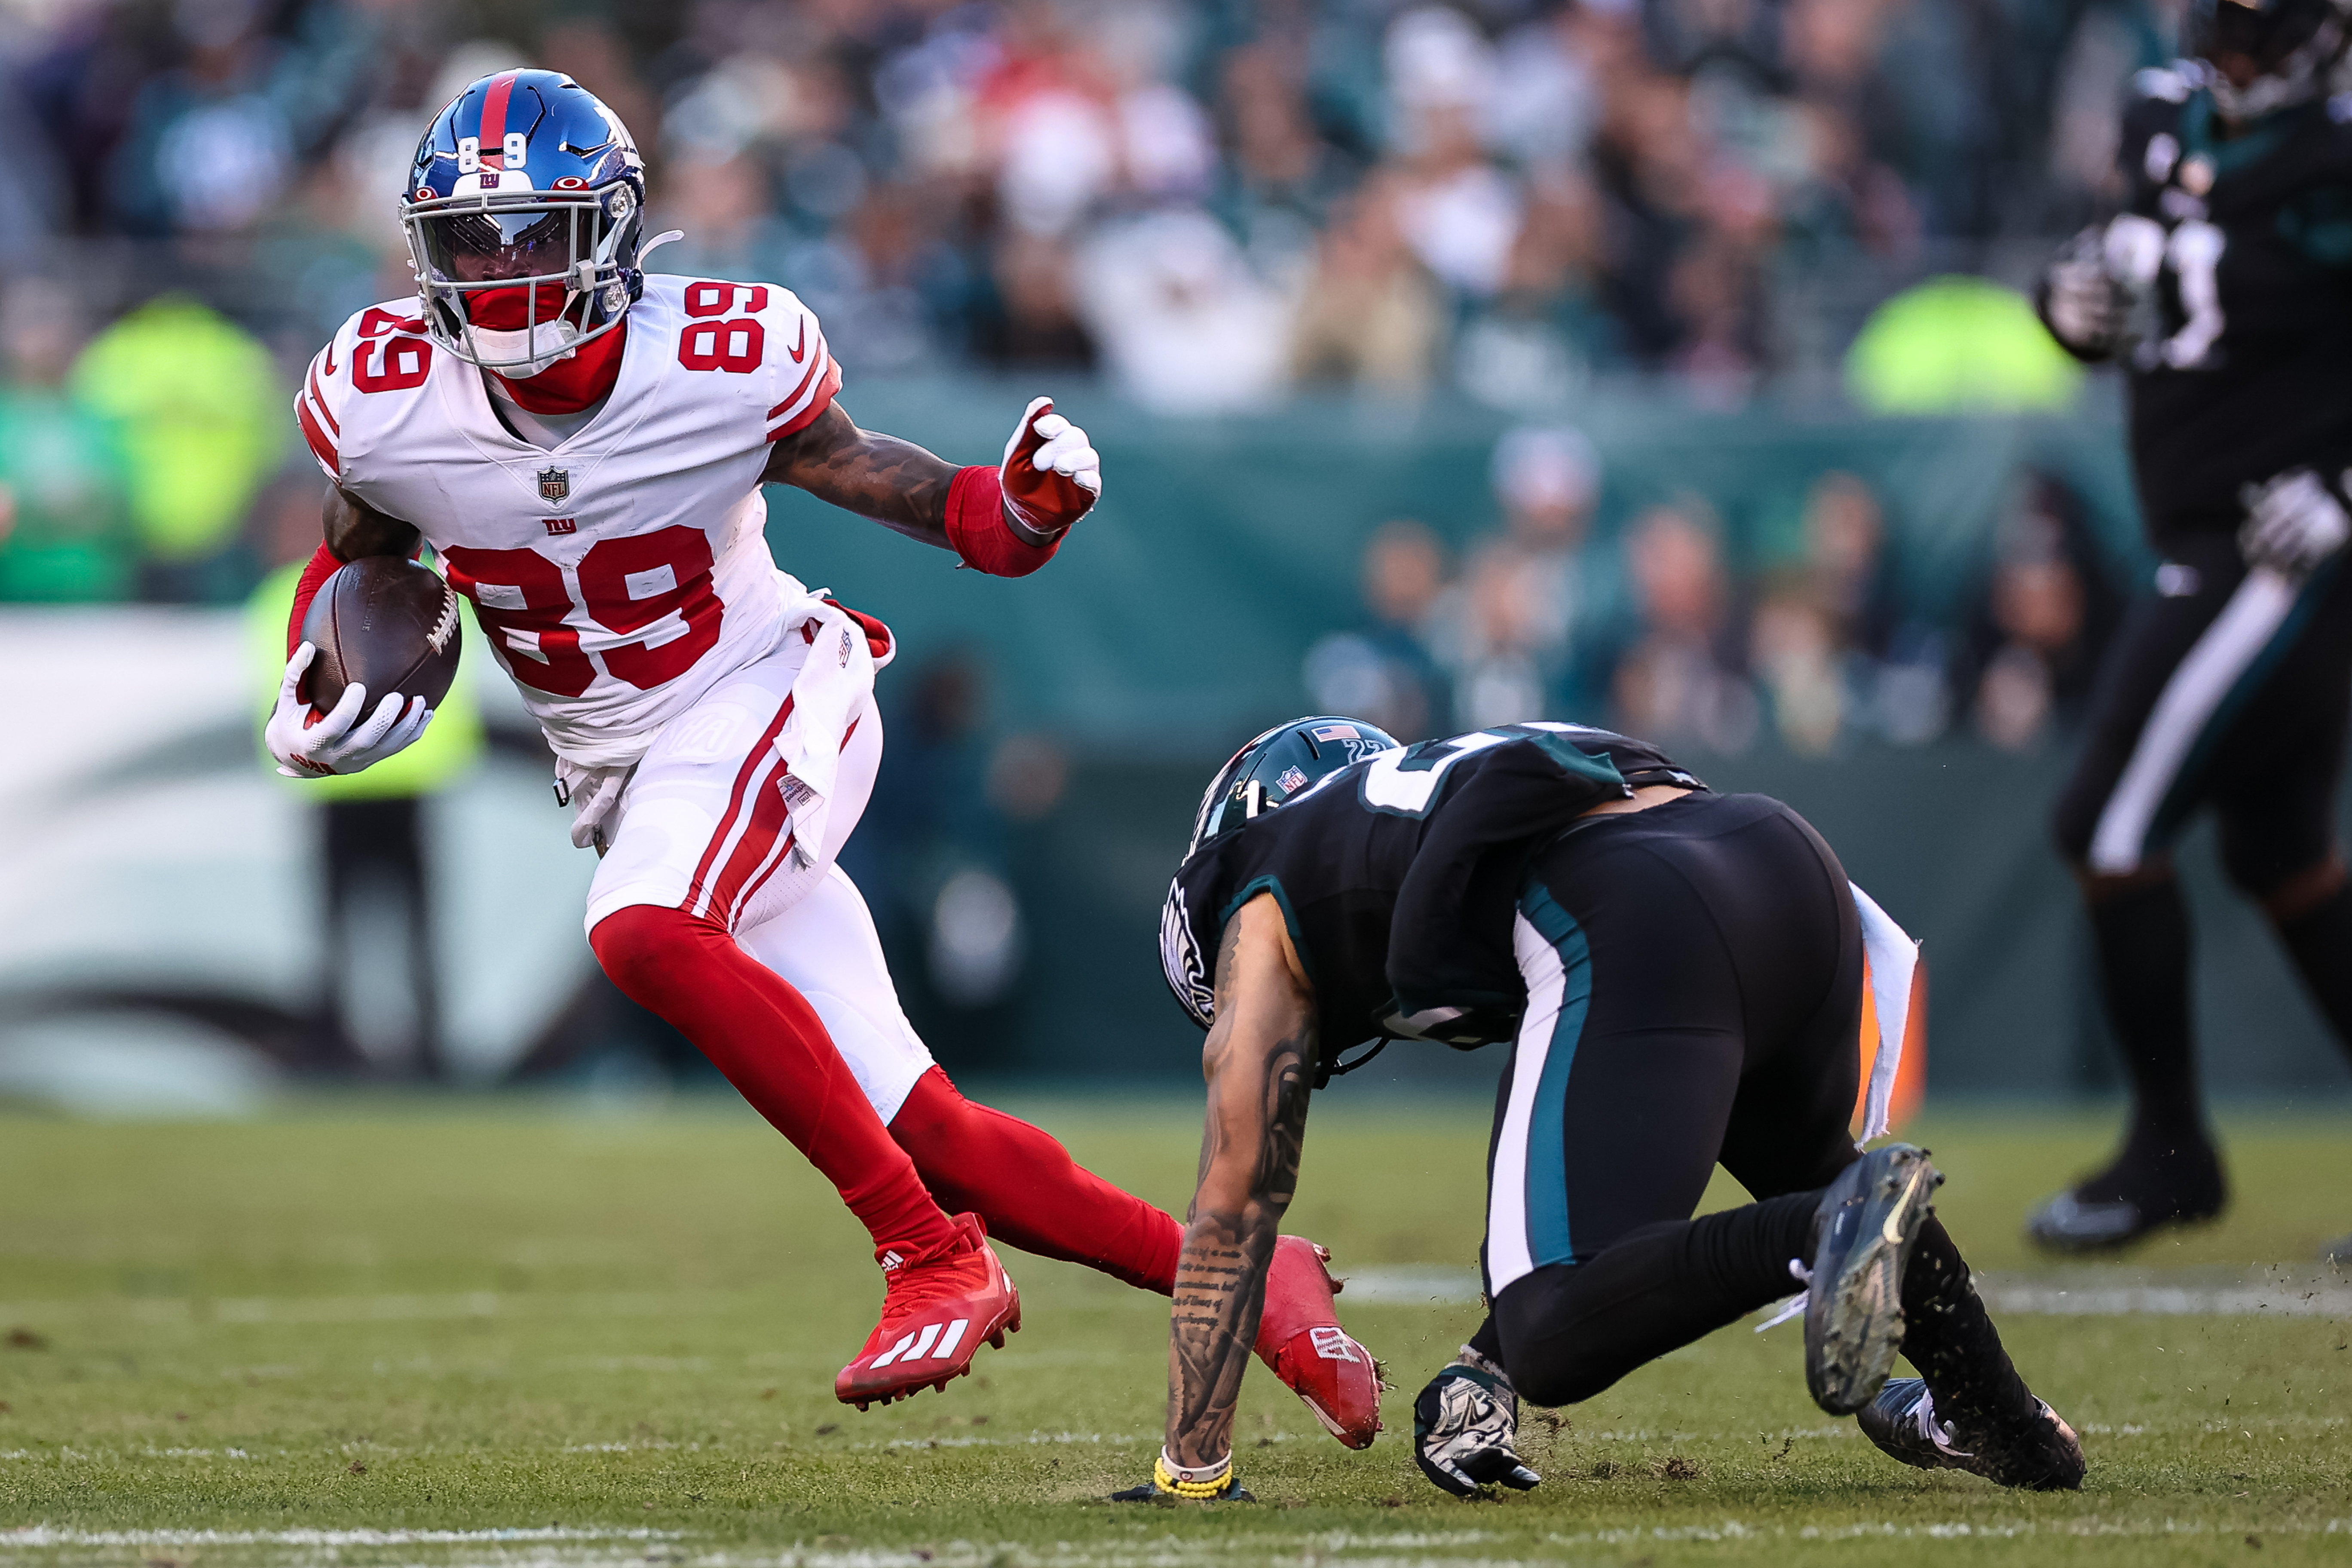 Kadarius Toney Not Available in Trades After Wan’Dale Robinson Pick, Giants GM Says